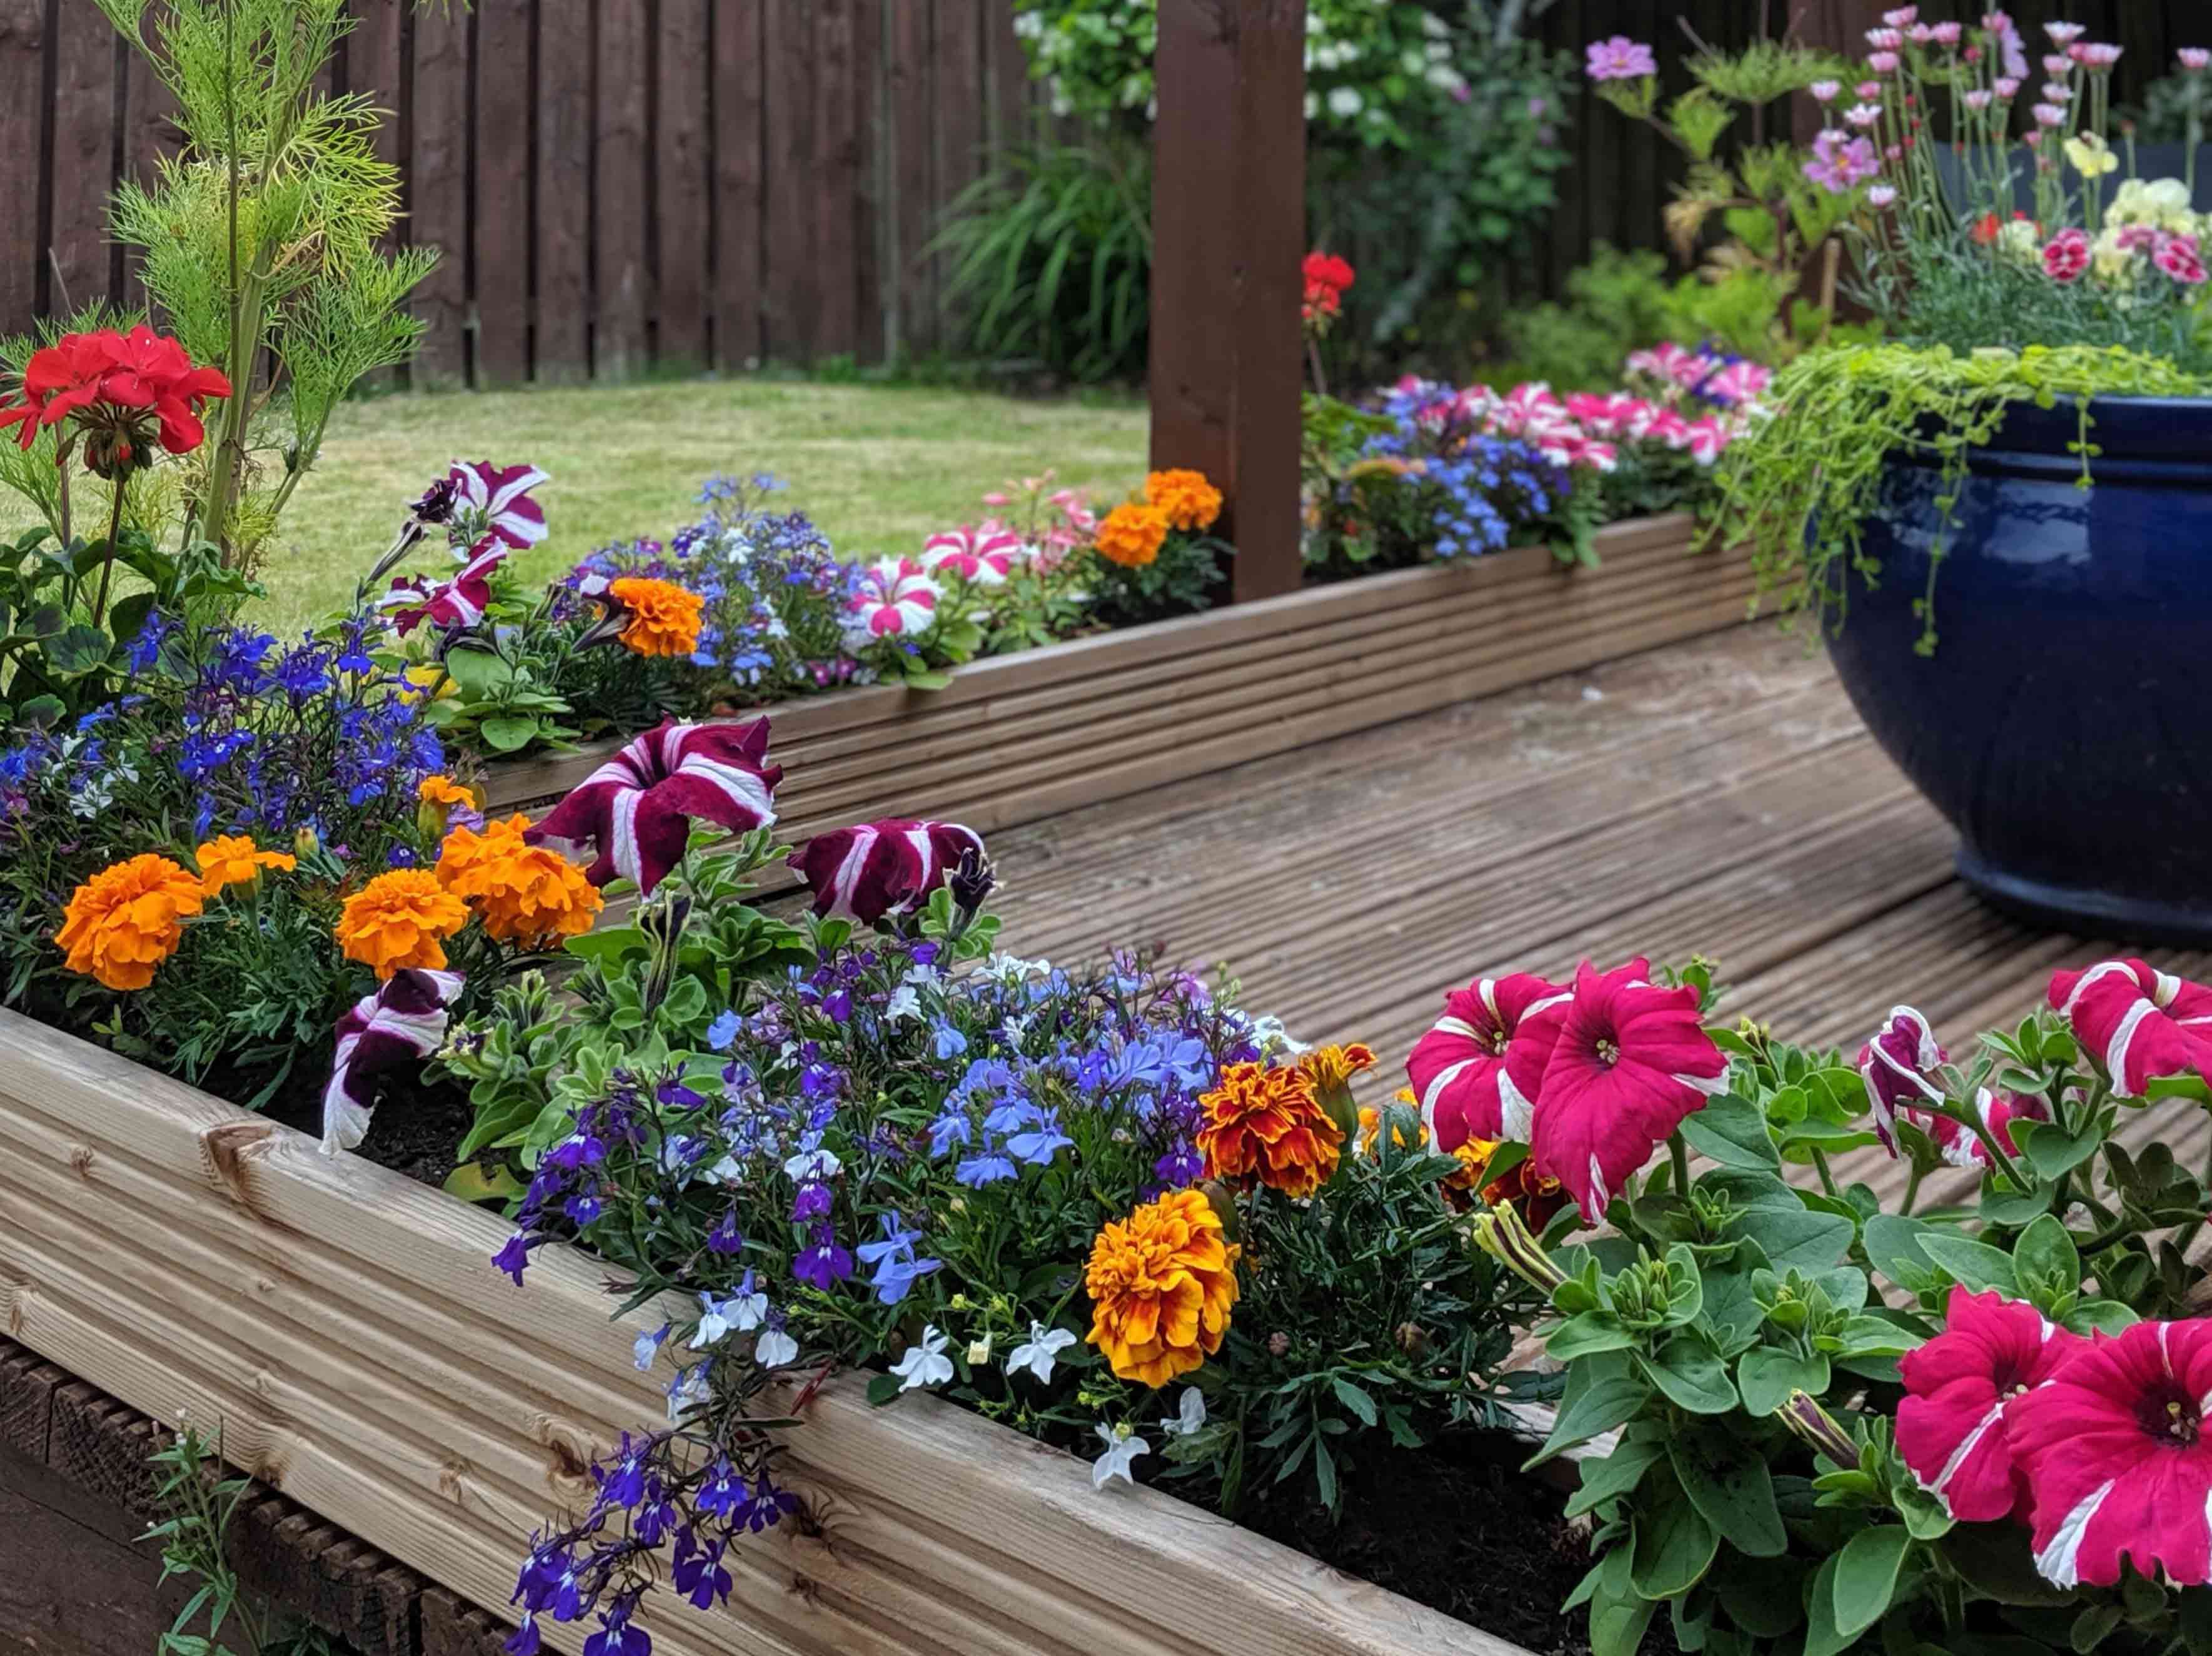 Wooden deck with many colorful flowers